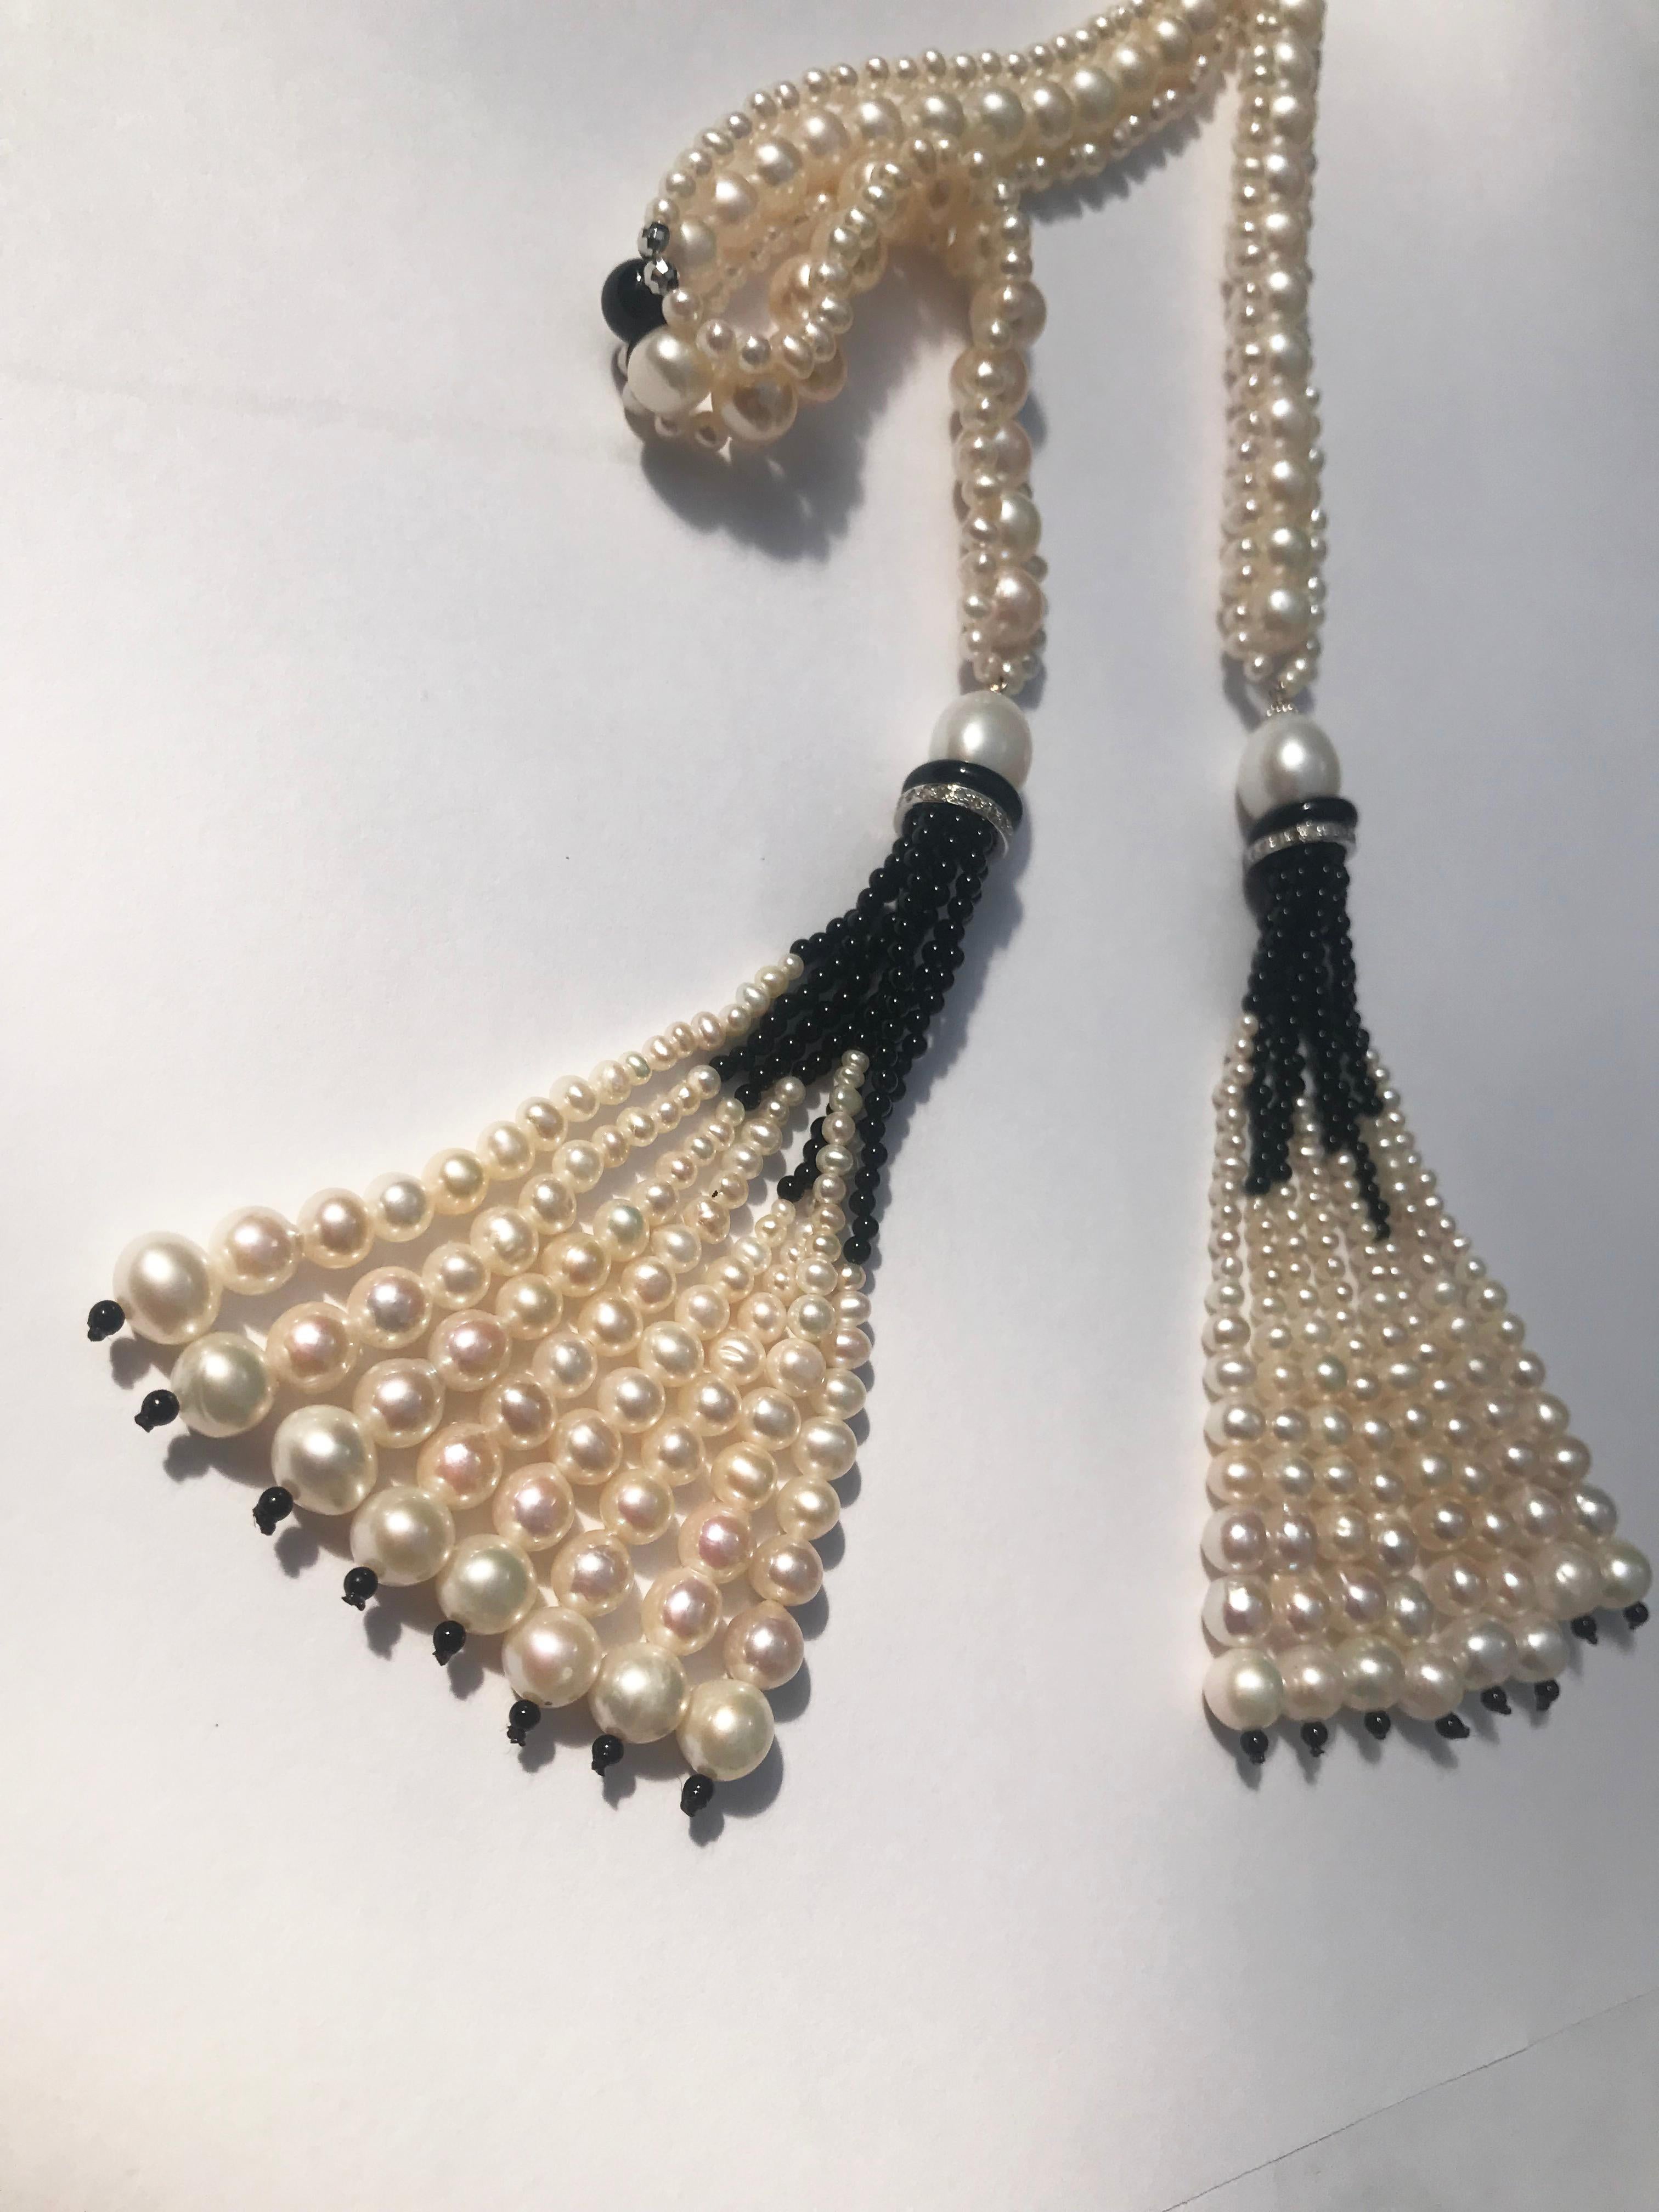 Marina J Woven Pearl Sautoir with Tassels and 14 K White Gold and Onyx beads 10